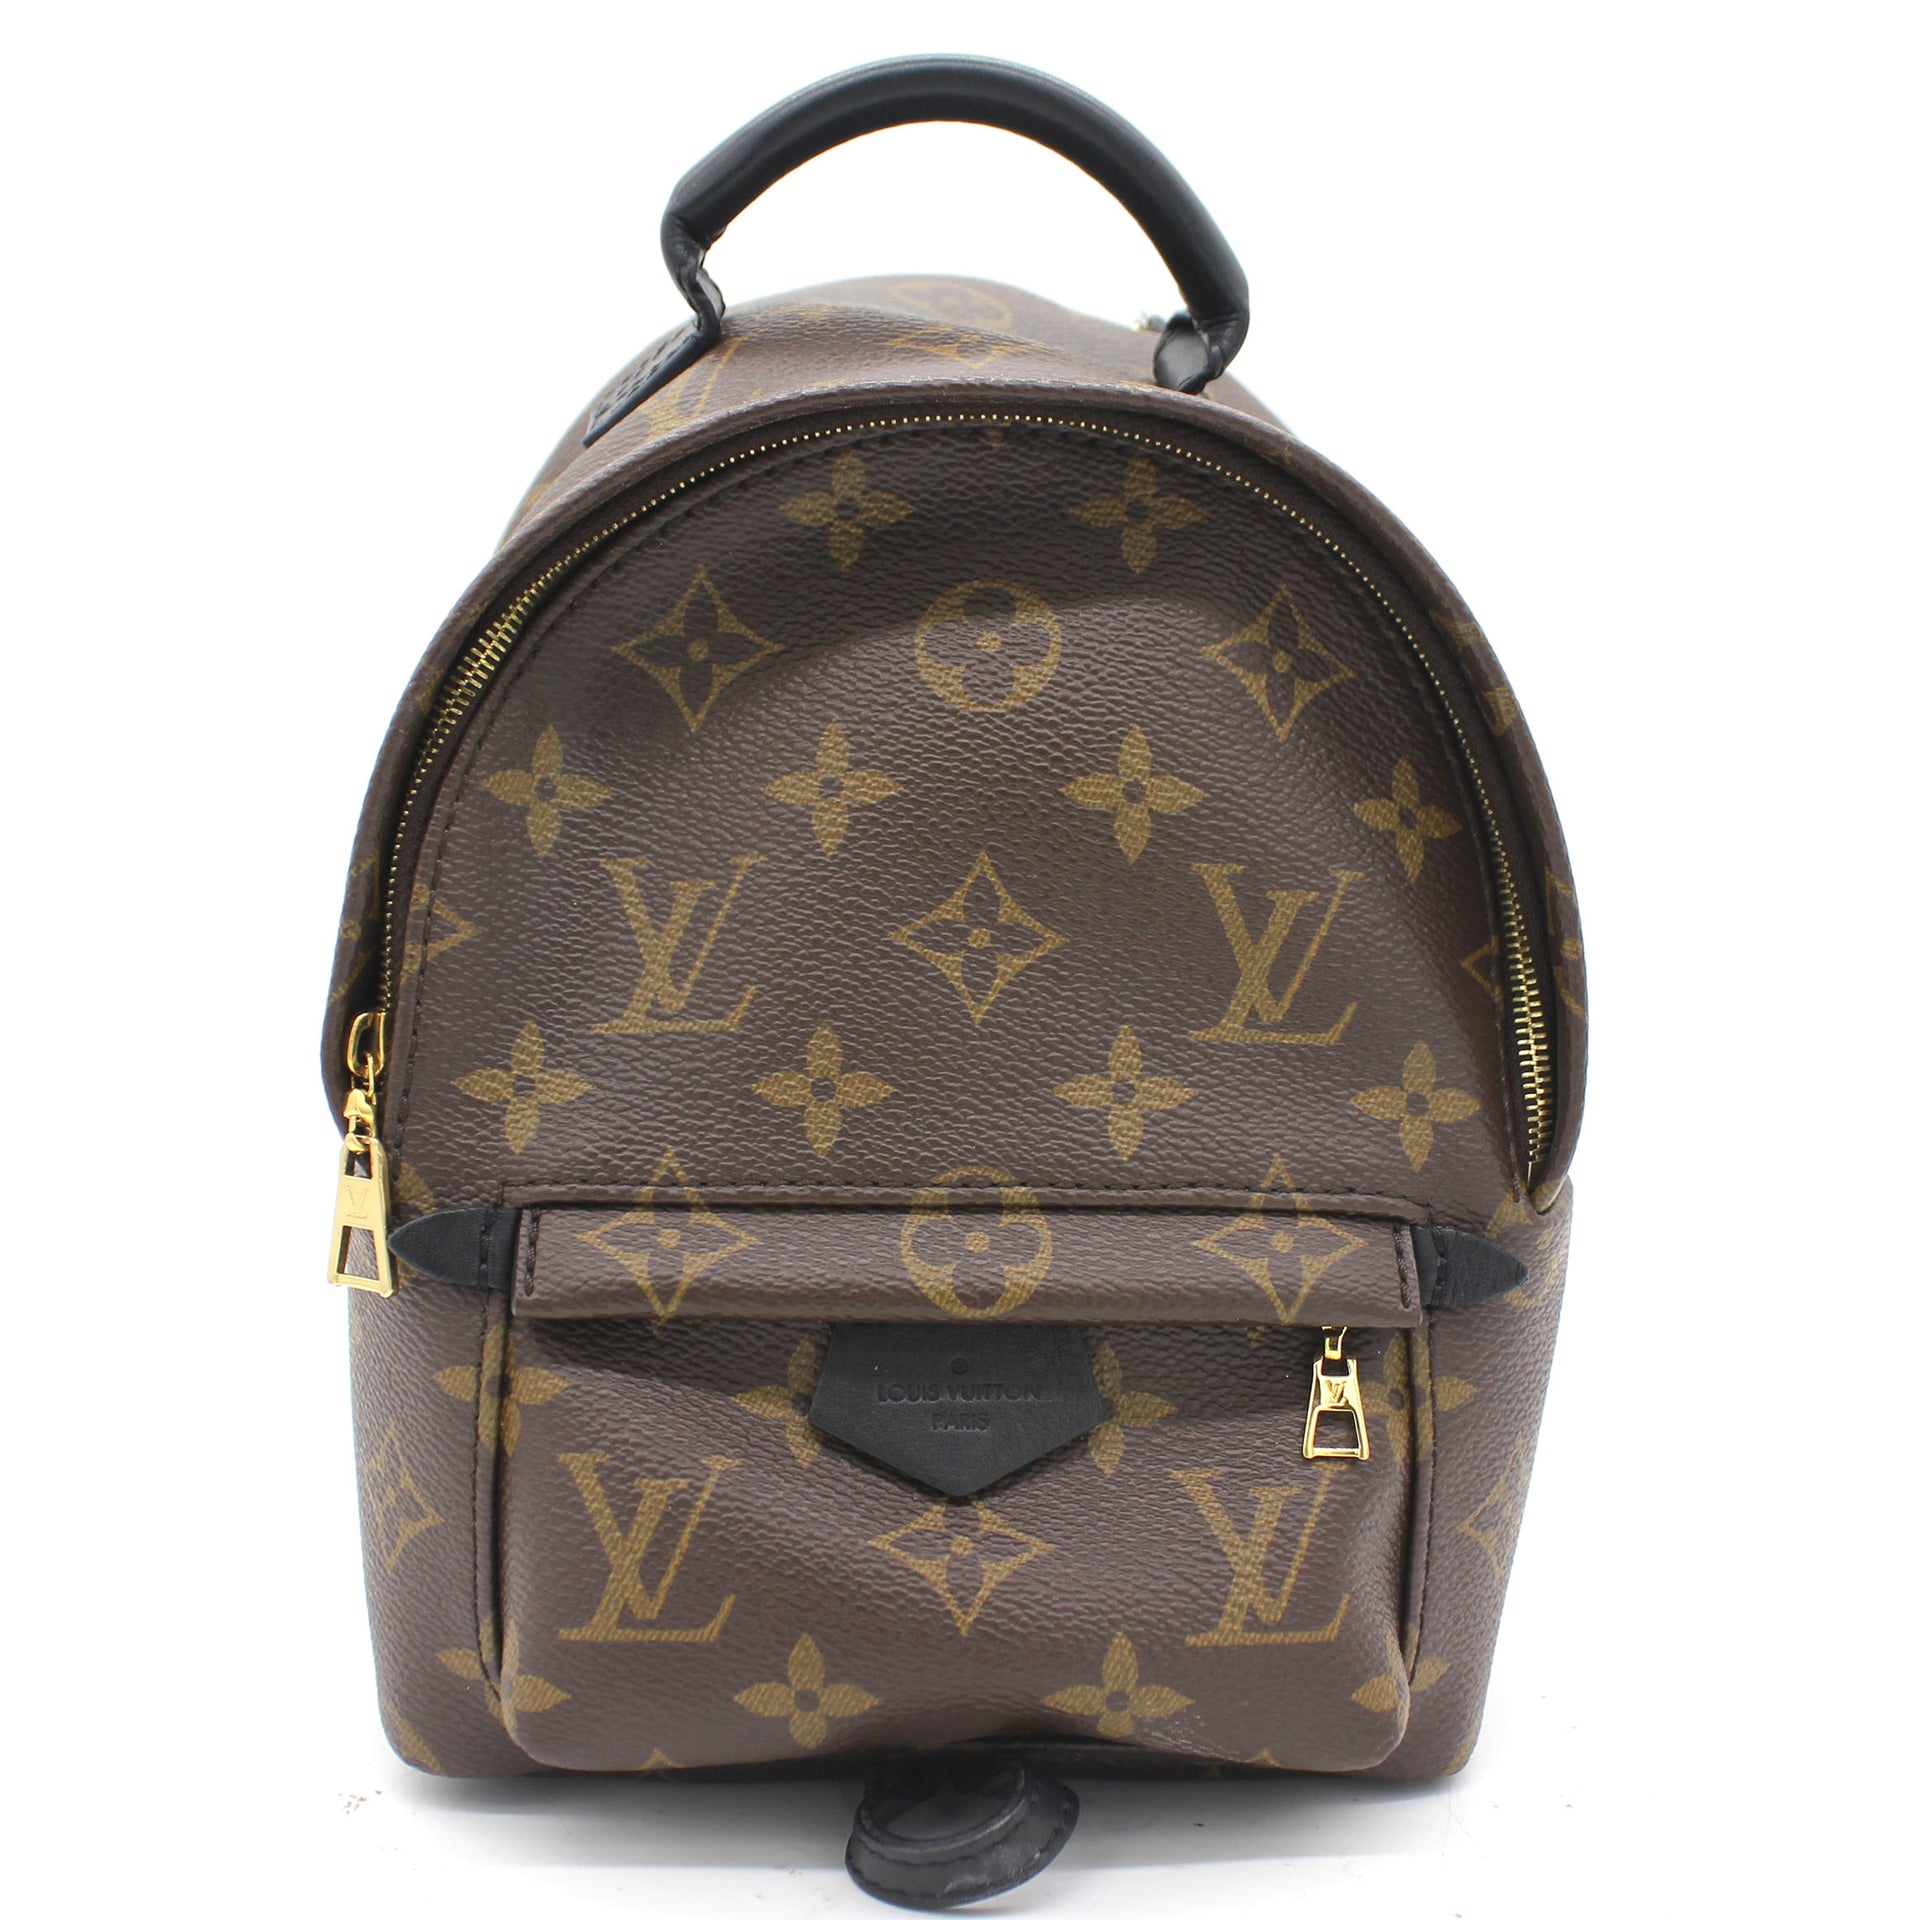 fashionhandbagshoes on Instagram This was the number 1 seller bag last  winter Louis Vuitton mini monogram backpack l  Fashion Louis vuitton  Cold outfits